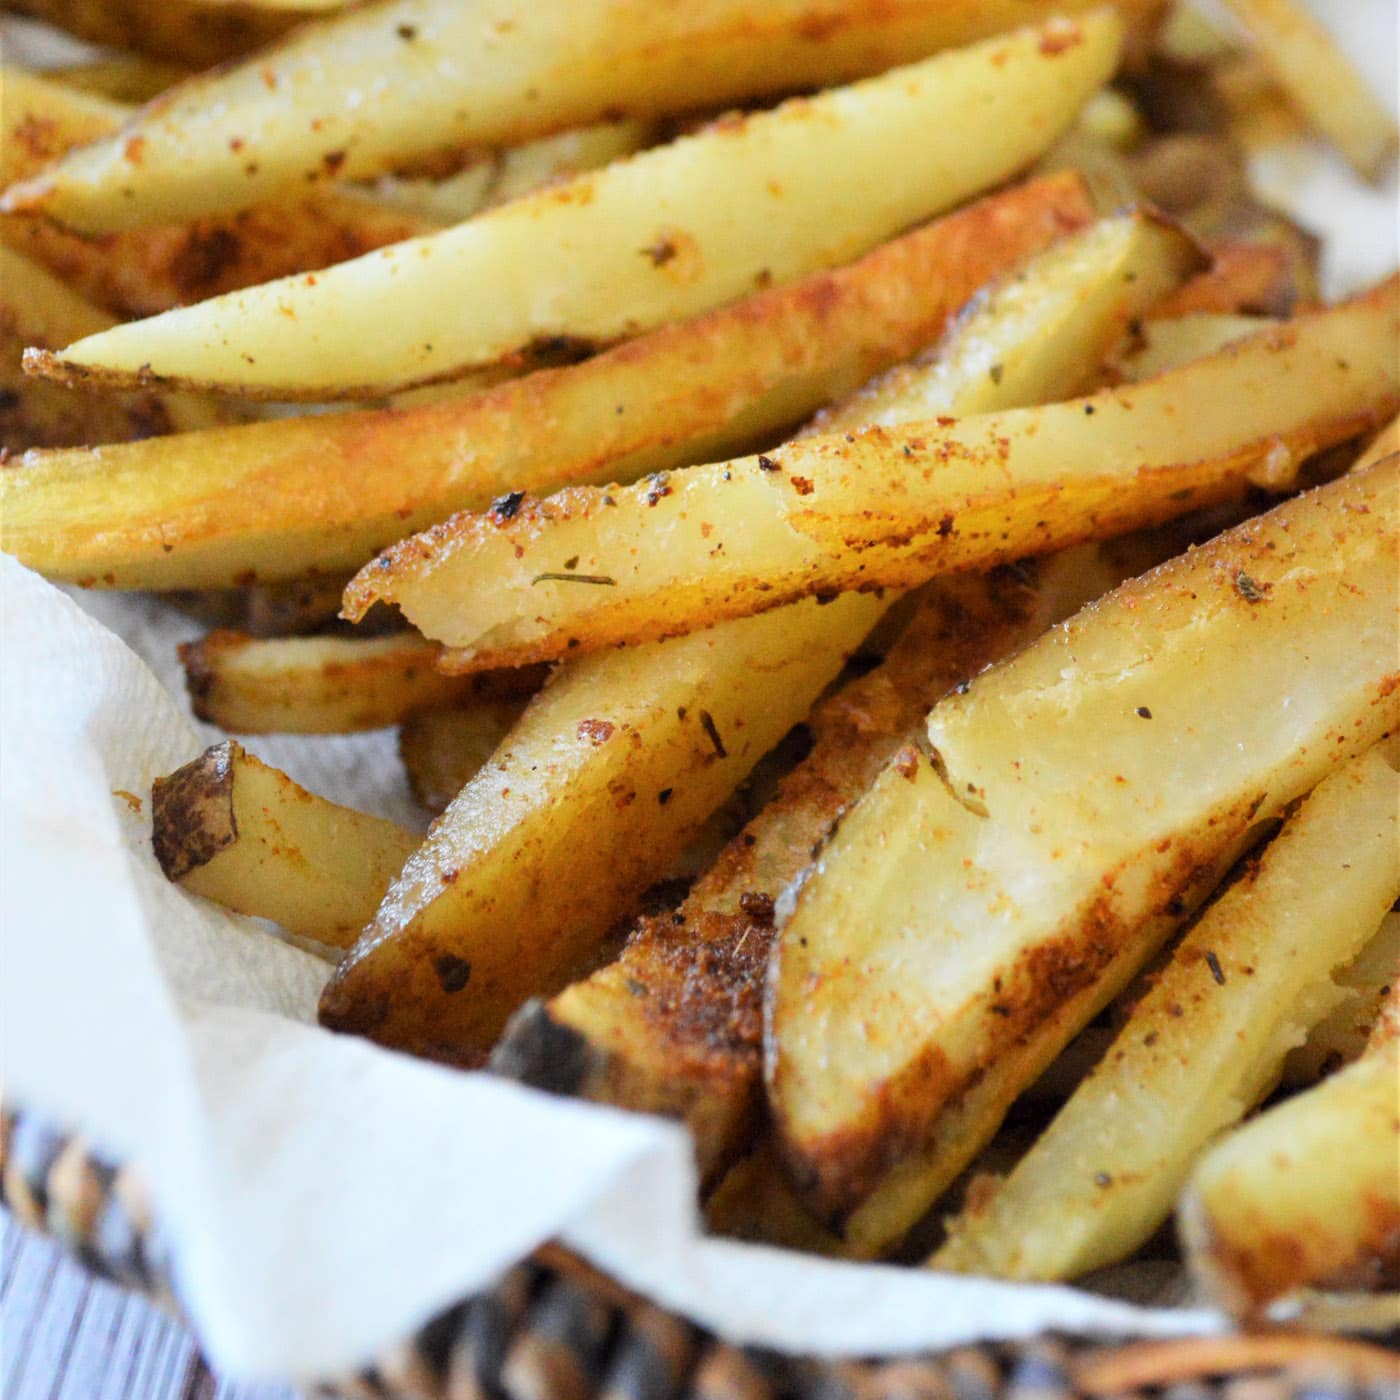 The Best Baked French Fries